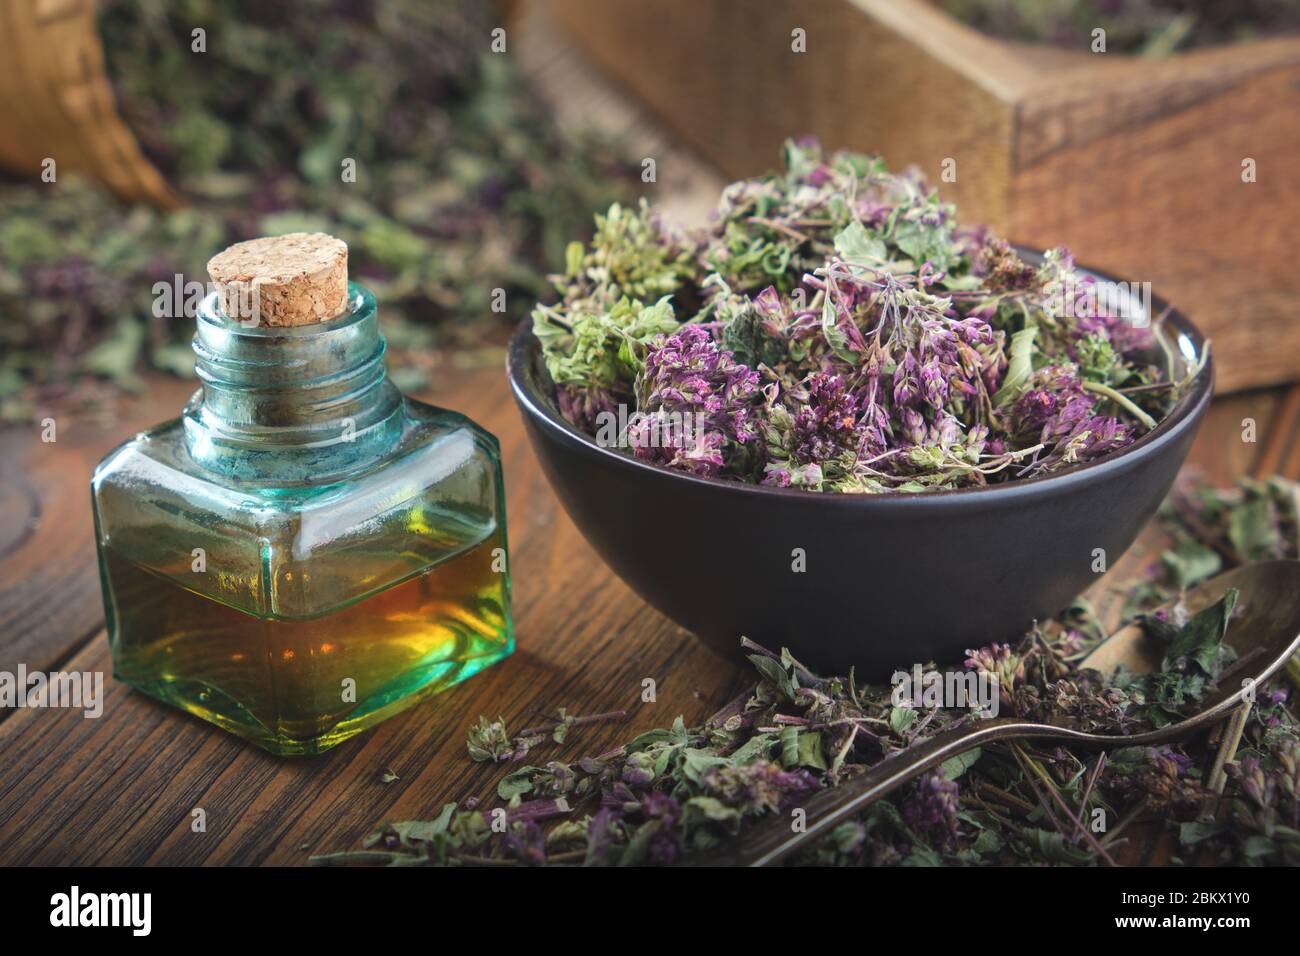 Bowl of dry Origanum vulgare or wild marjoram flowers. Bottle of essential oil or infusion. Stock Photo